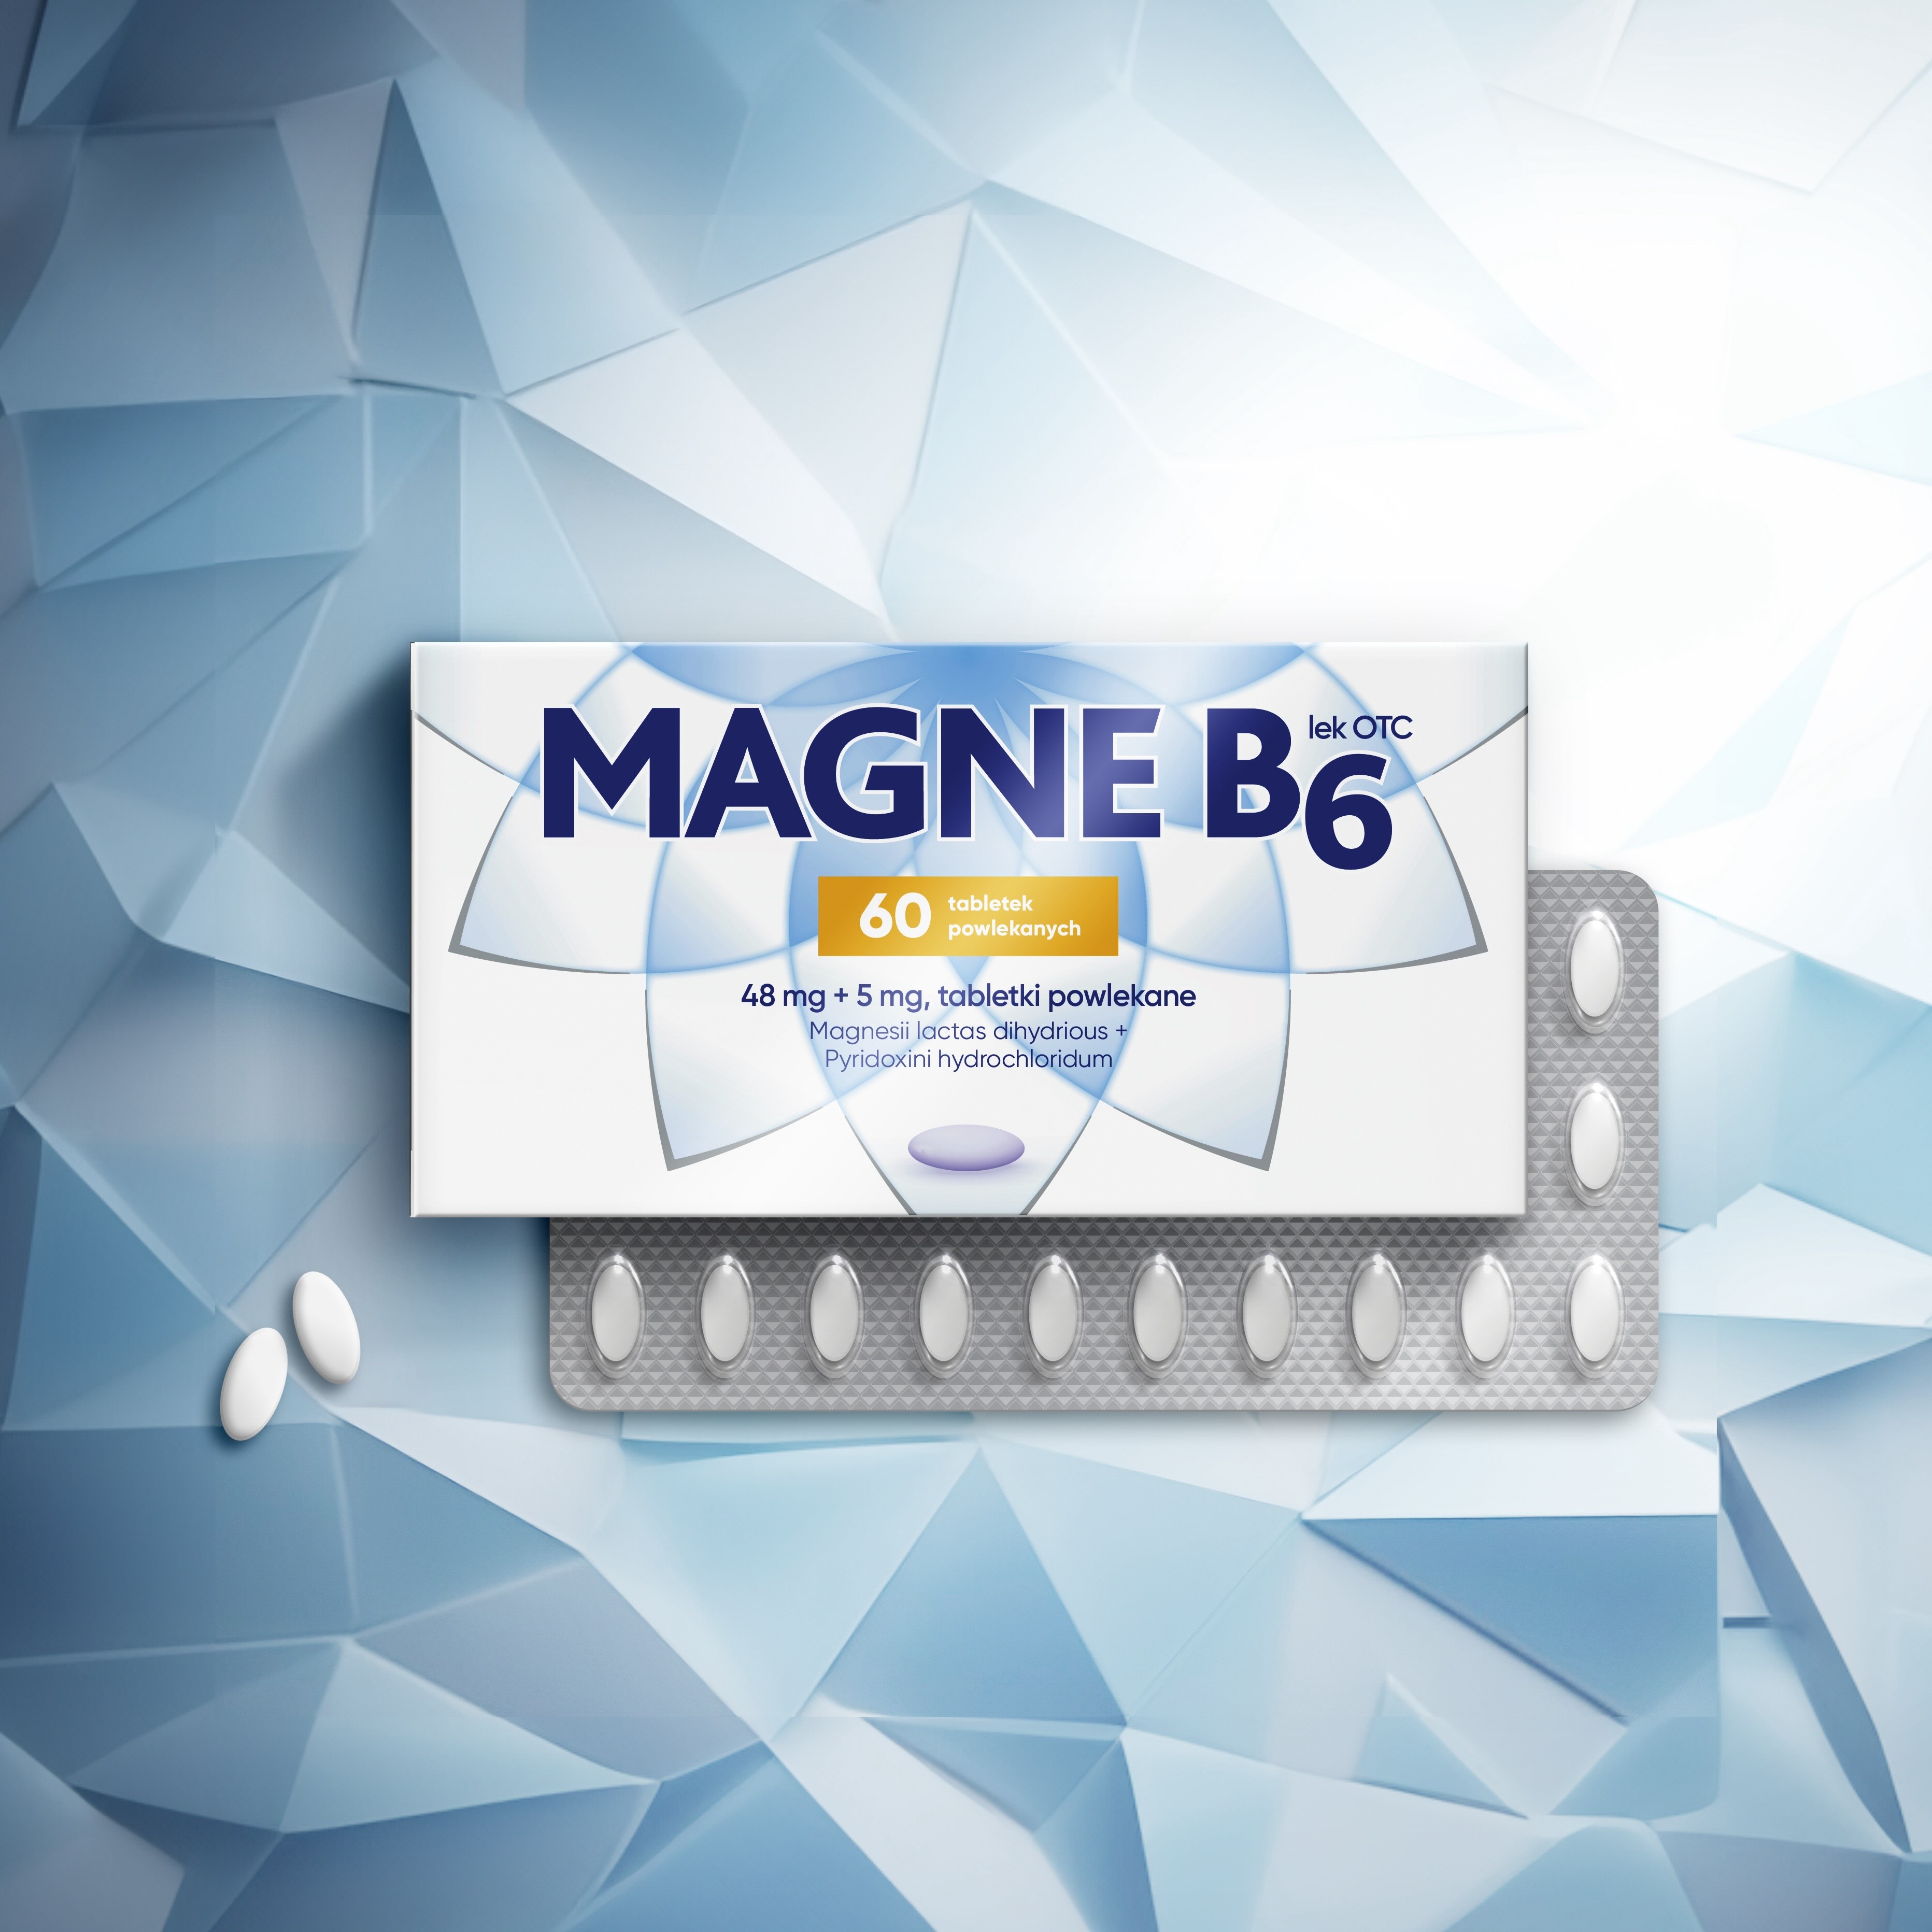 Magnesium Wellness Product, Magne B6, Reveals New Visual Identity Devised by Brand Elevation Agency, Free The Birds, to Support Entry into Wellness Market